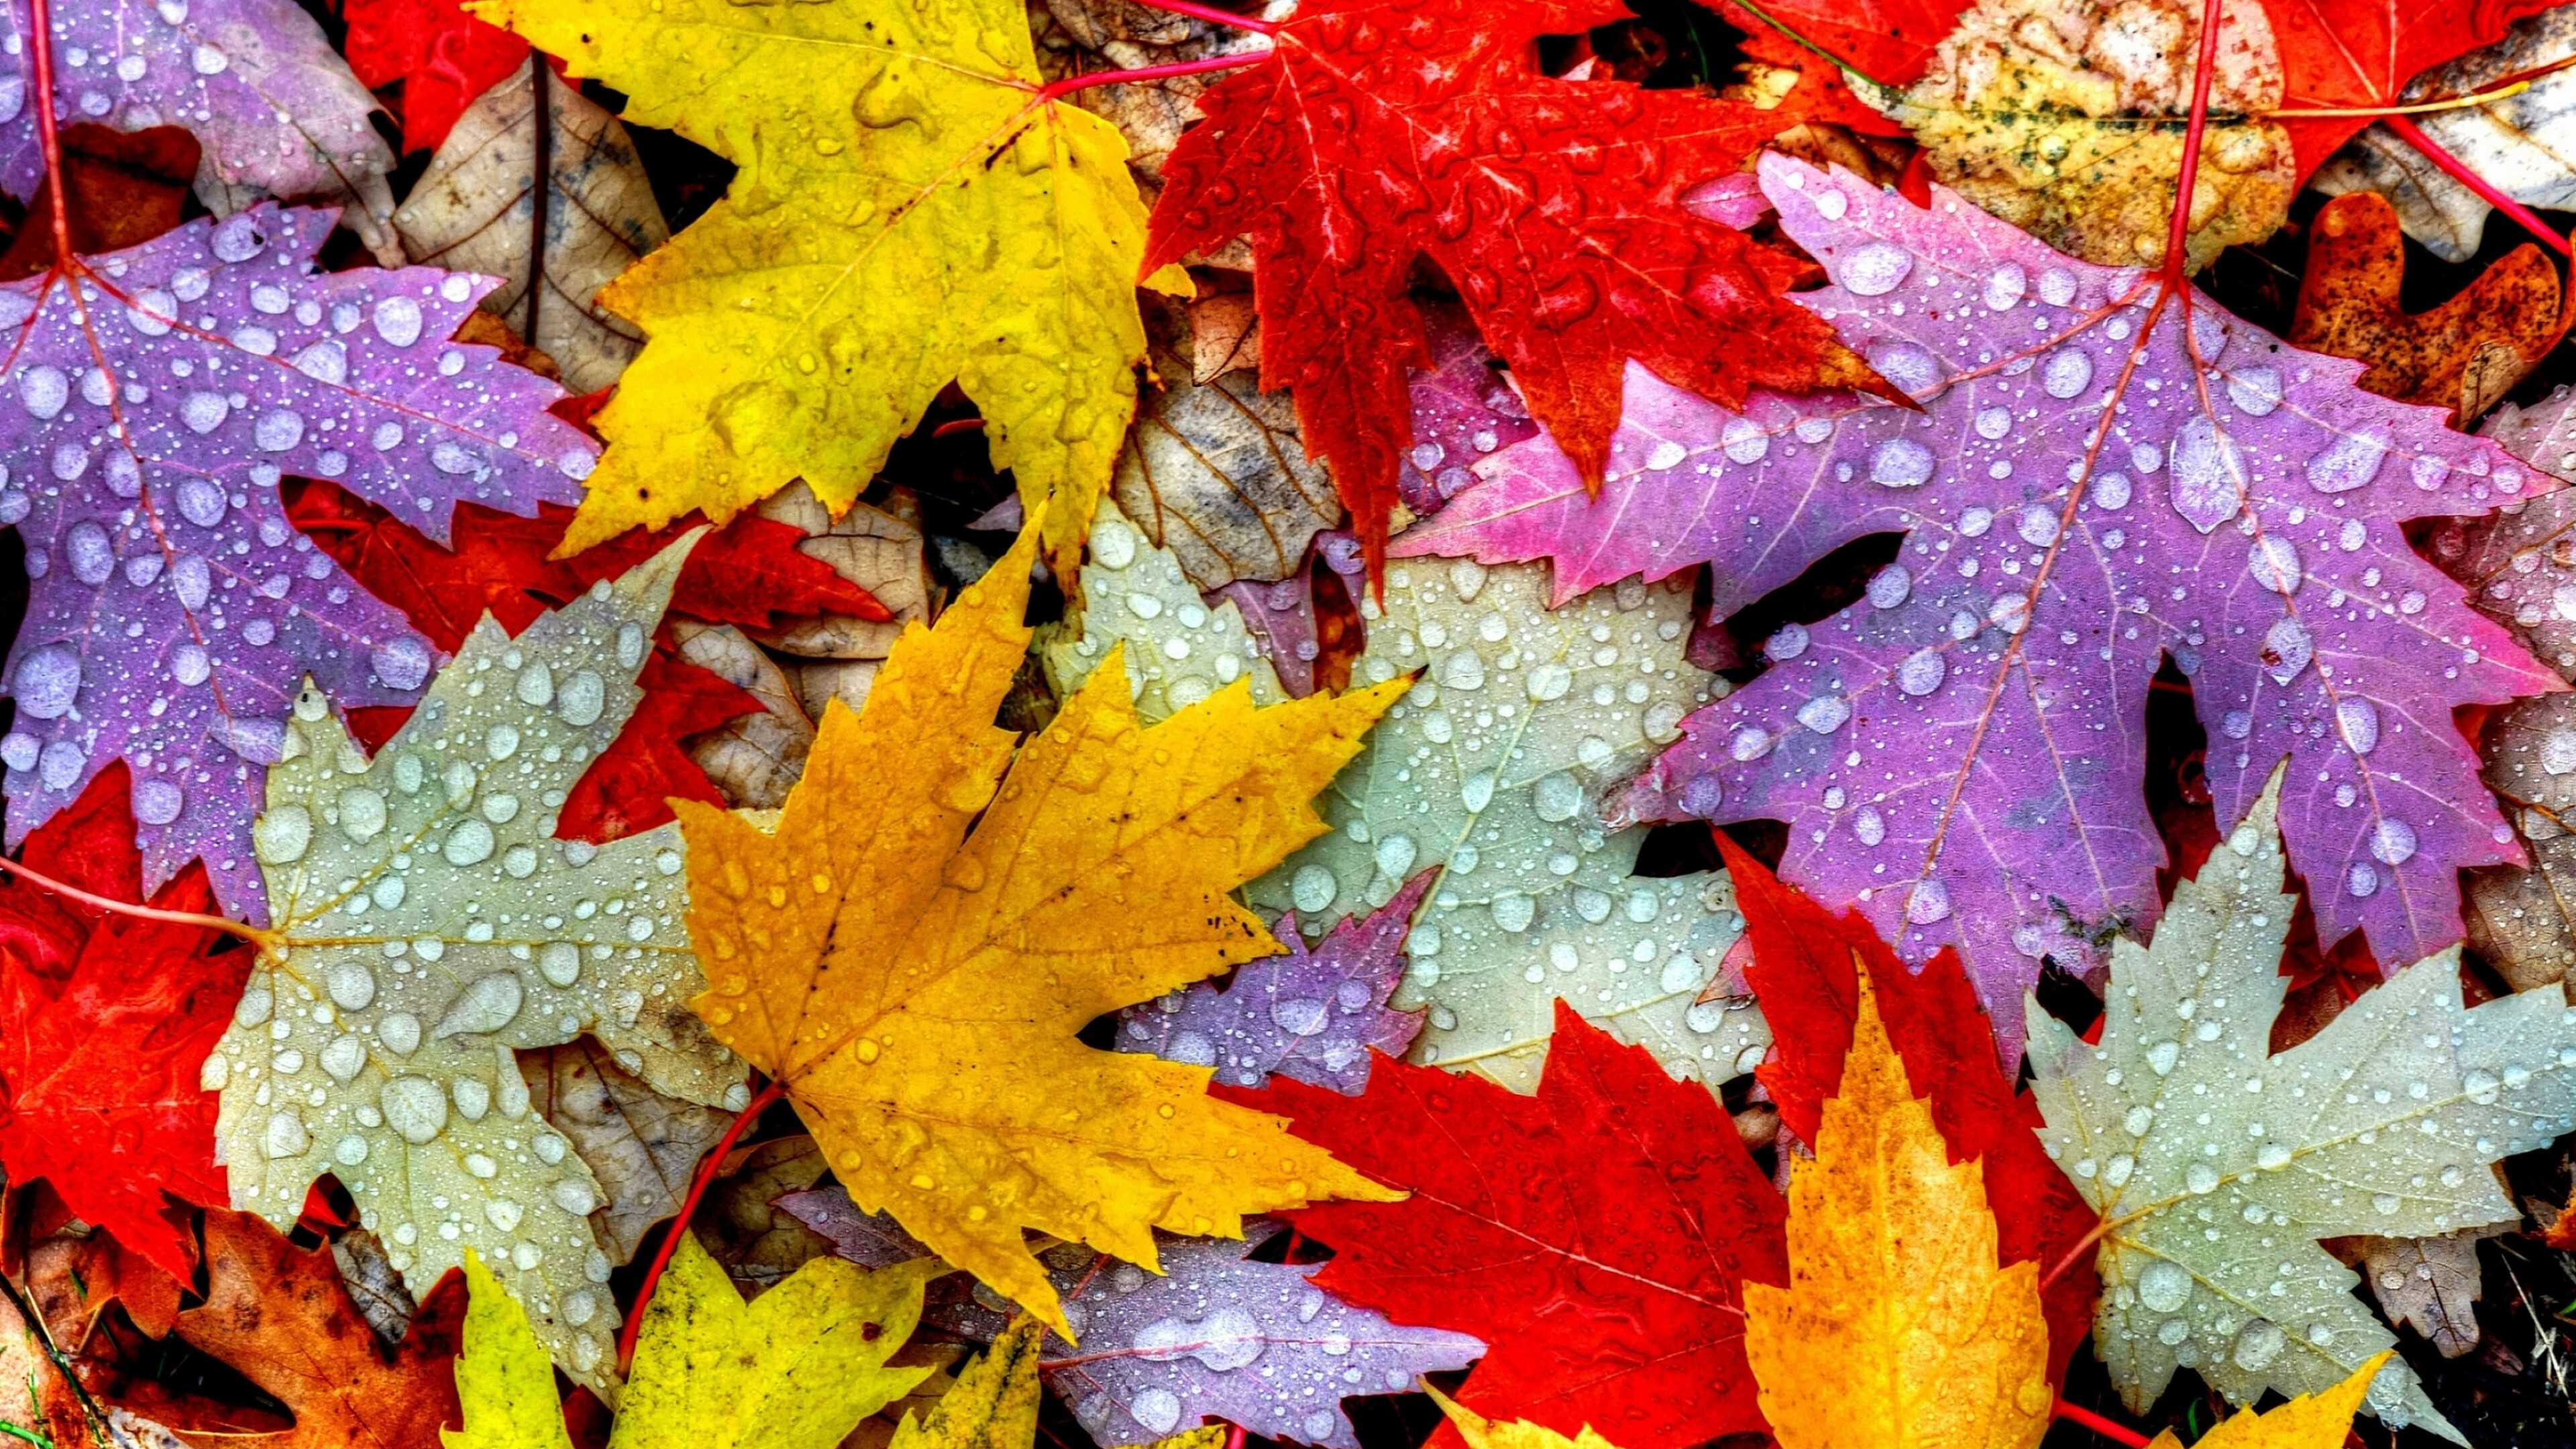 Gold Leaf: Brightly colored maple leaves, Purple, red and orange fall foliage, Natural beauty. 3840x2160 4K Wallpaper.